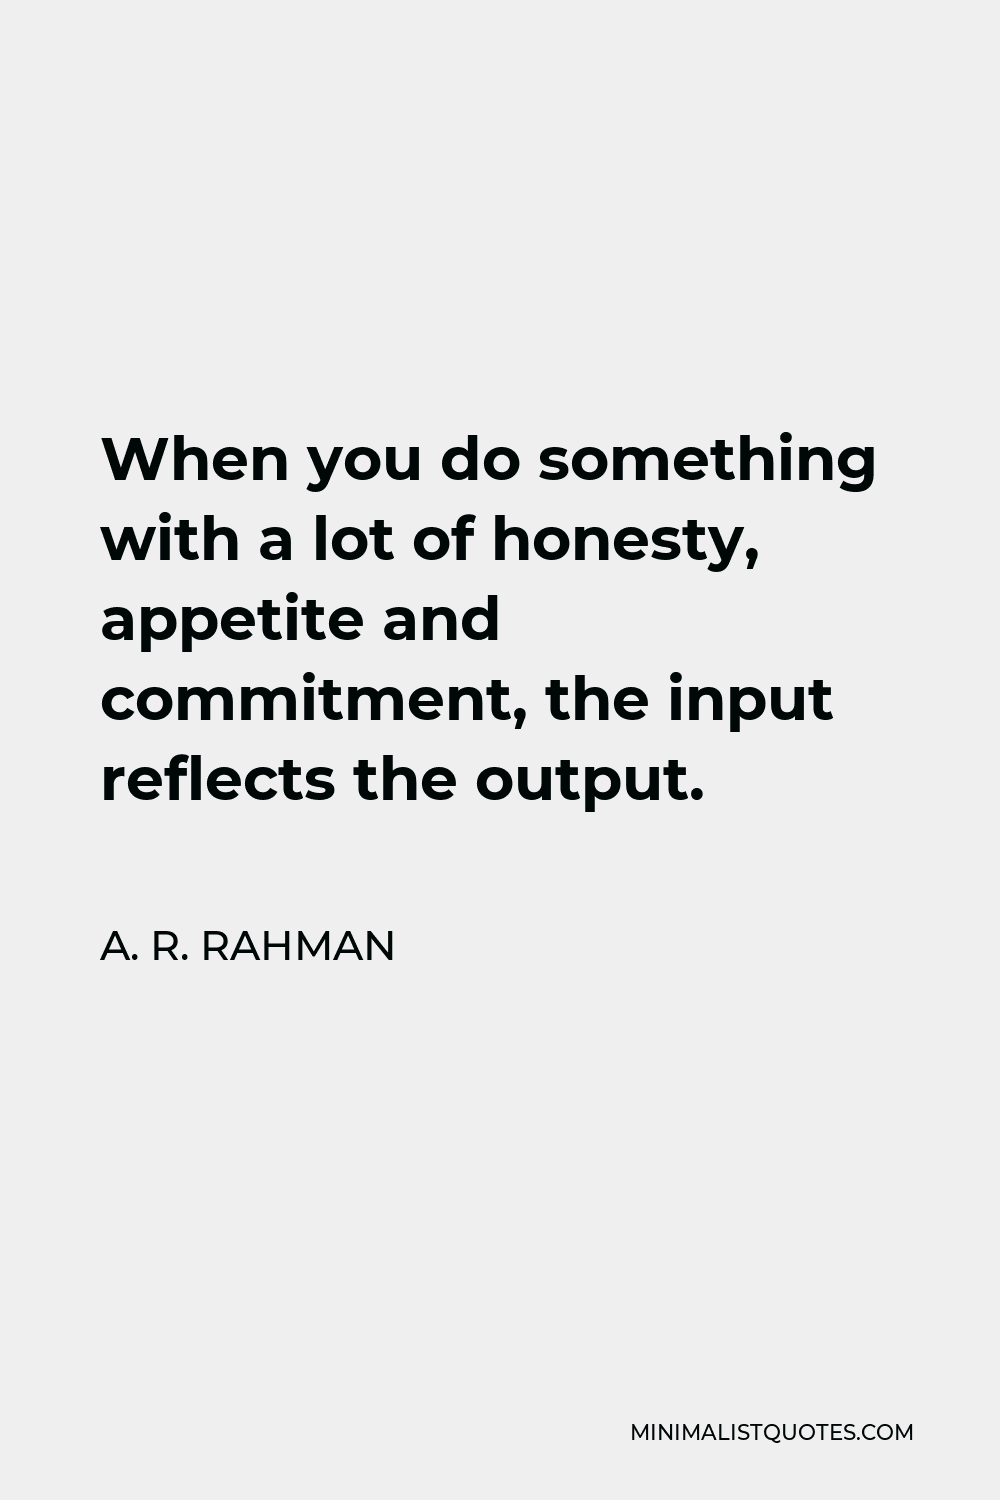 A. R. Rahman Quote - When you do something with a lot of honesty, appetite and commitment, the input reflects the output.